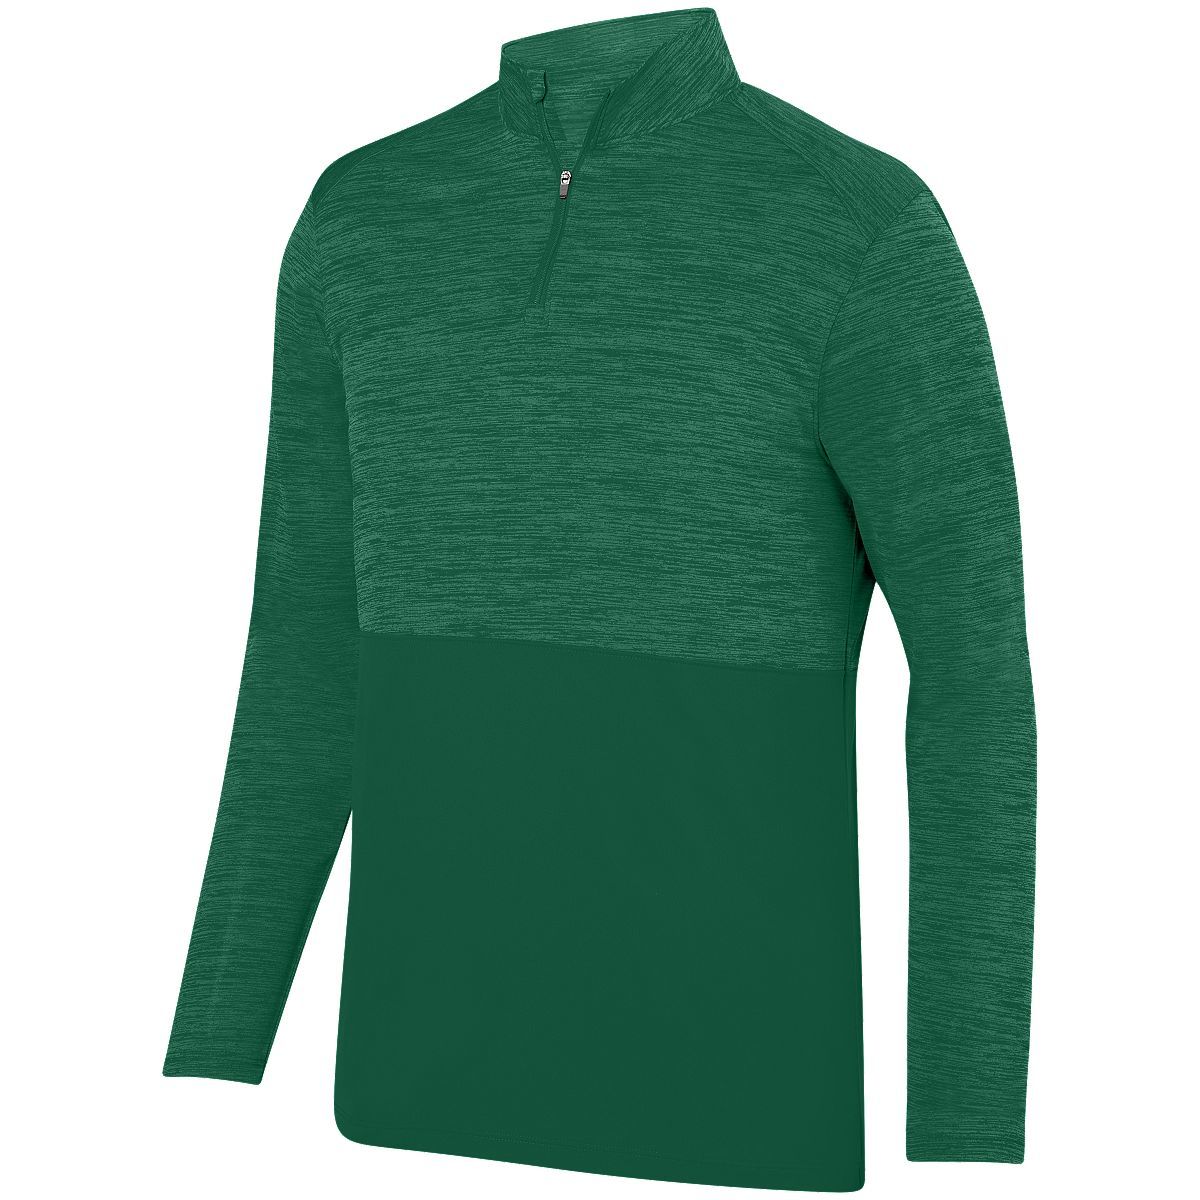 Augusta Sportswear Shadow Tonal Heather 1/4 Zip Pullover in Dark Green  -Part of the Adult, Adult-Pullover, Augusta-Products, Outerwear, Tonal-Fleece-Collection product lines at KanaleyCreations.com